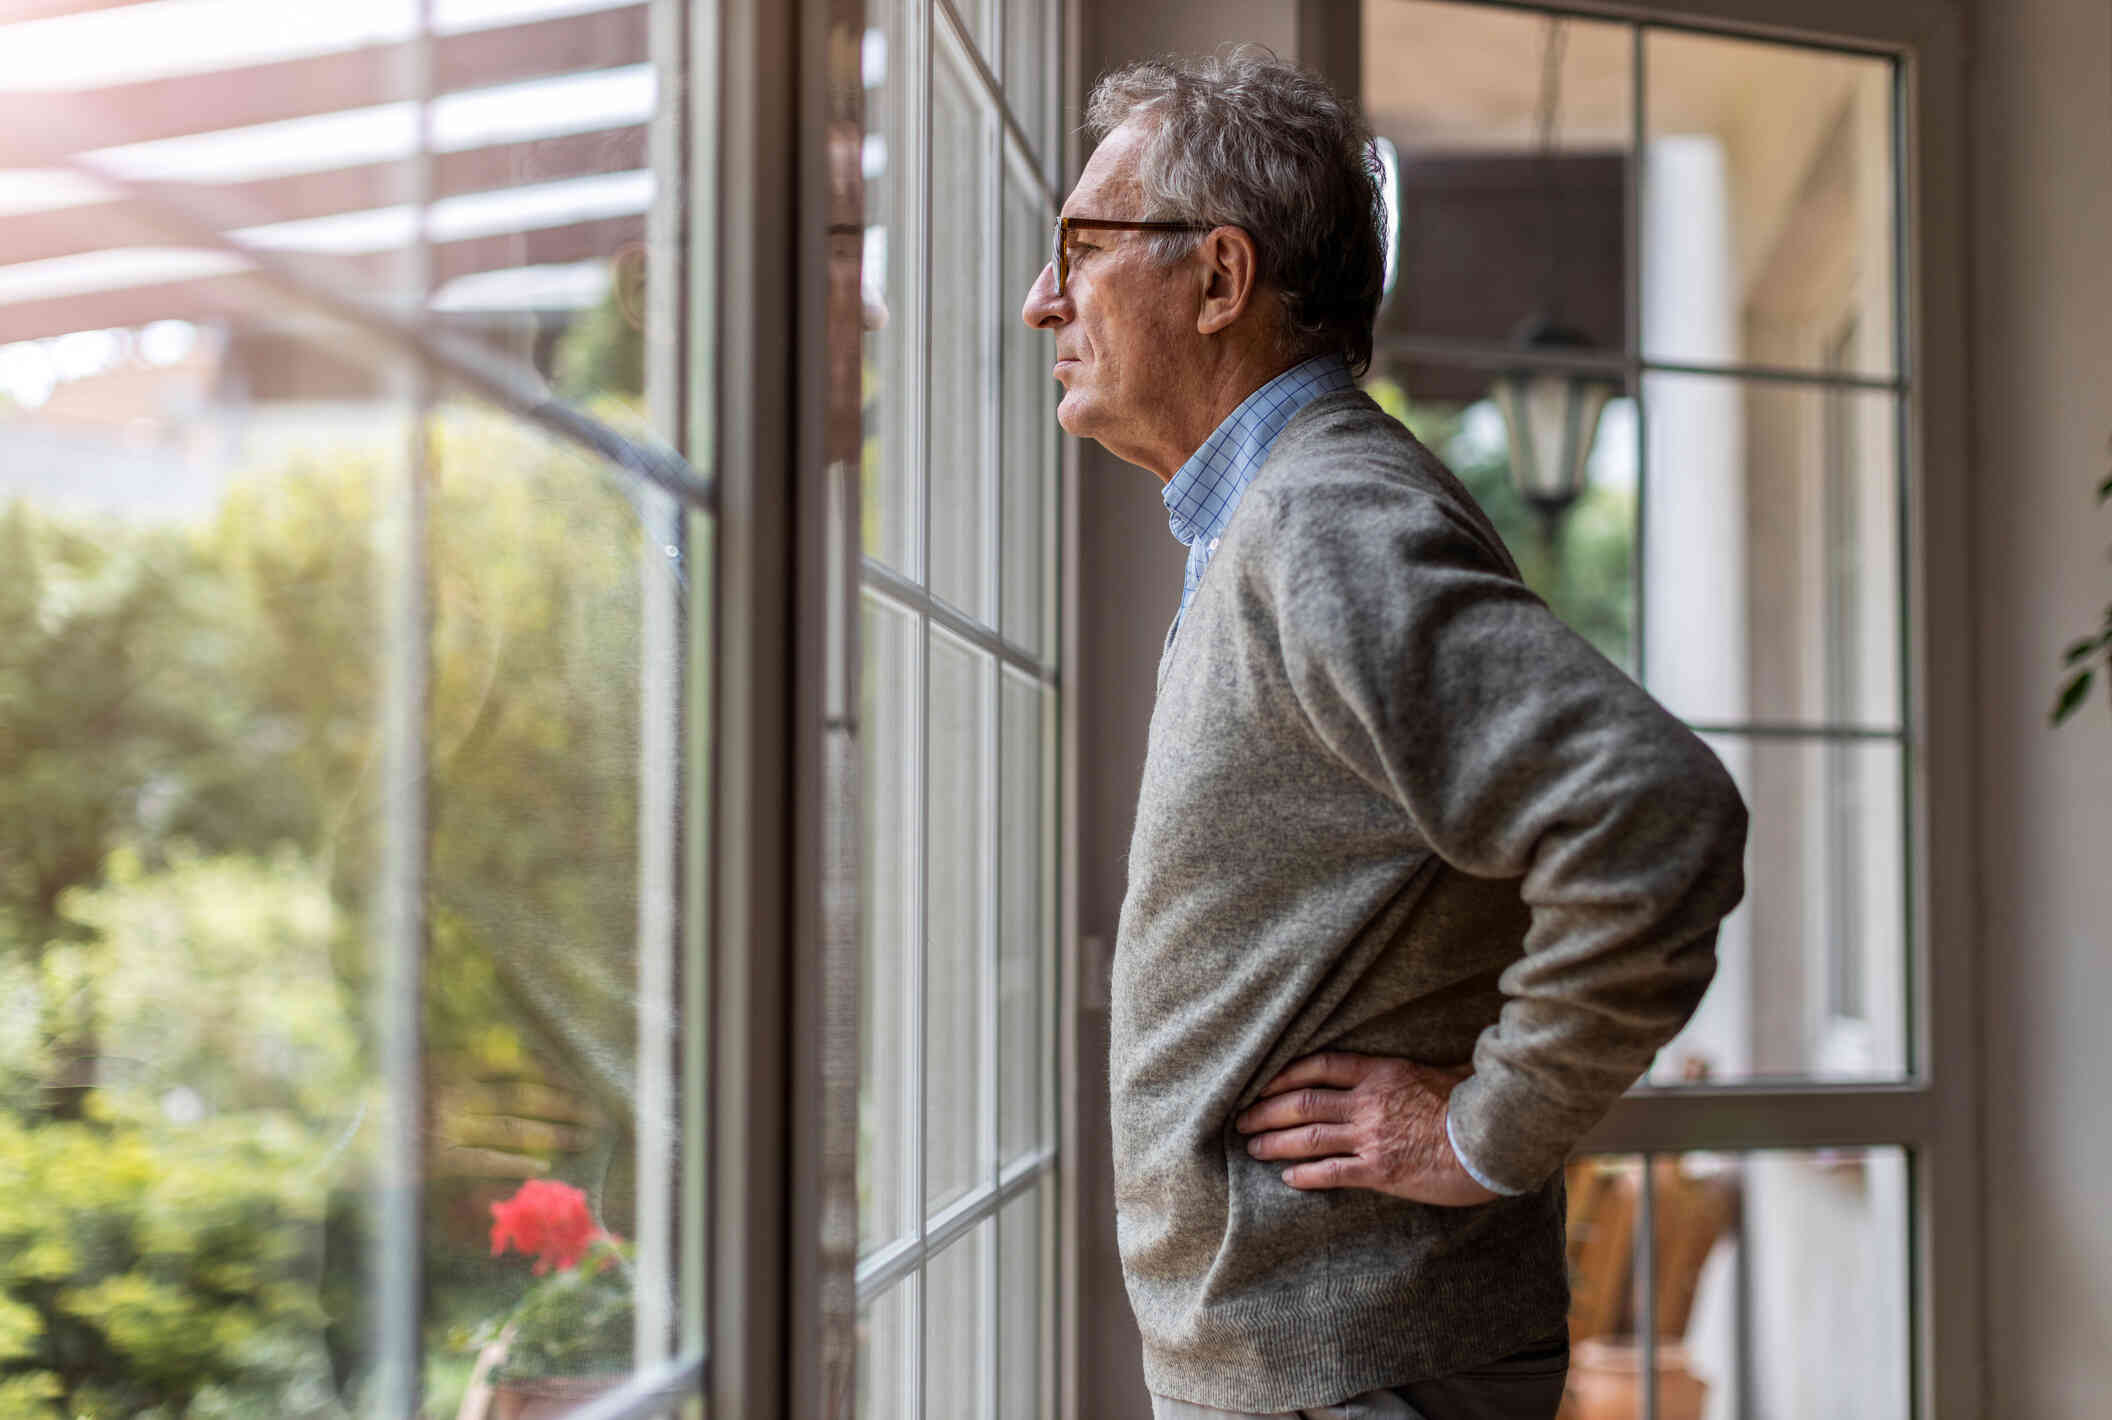 An elderly man in a grey sweater stands near the window of his home and rests his hands on his hip while deep in thought.